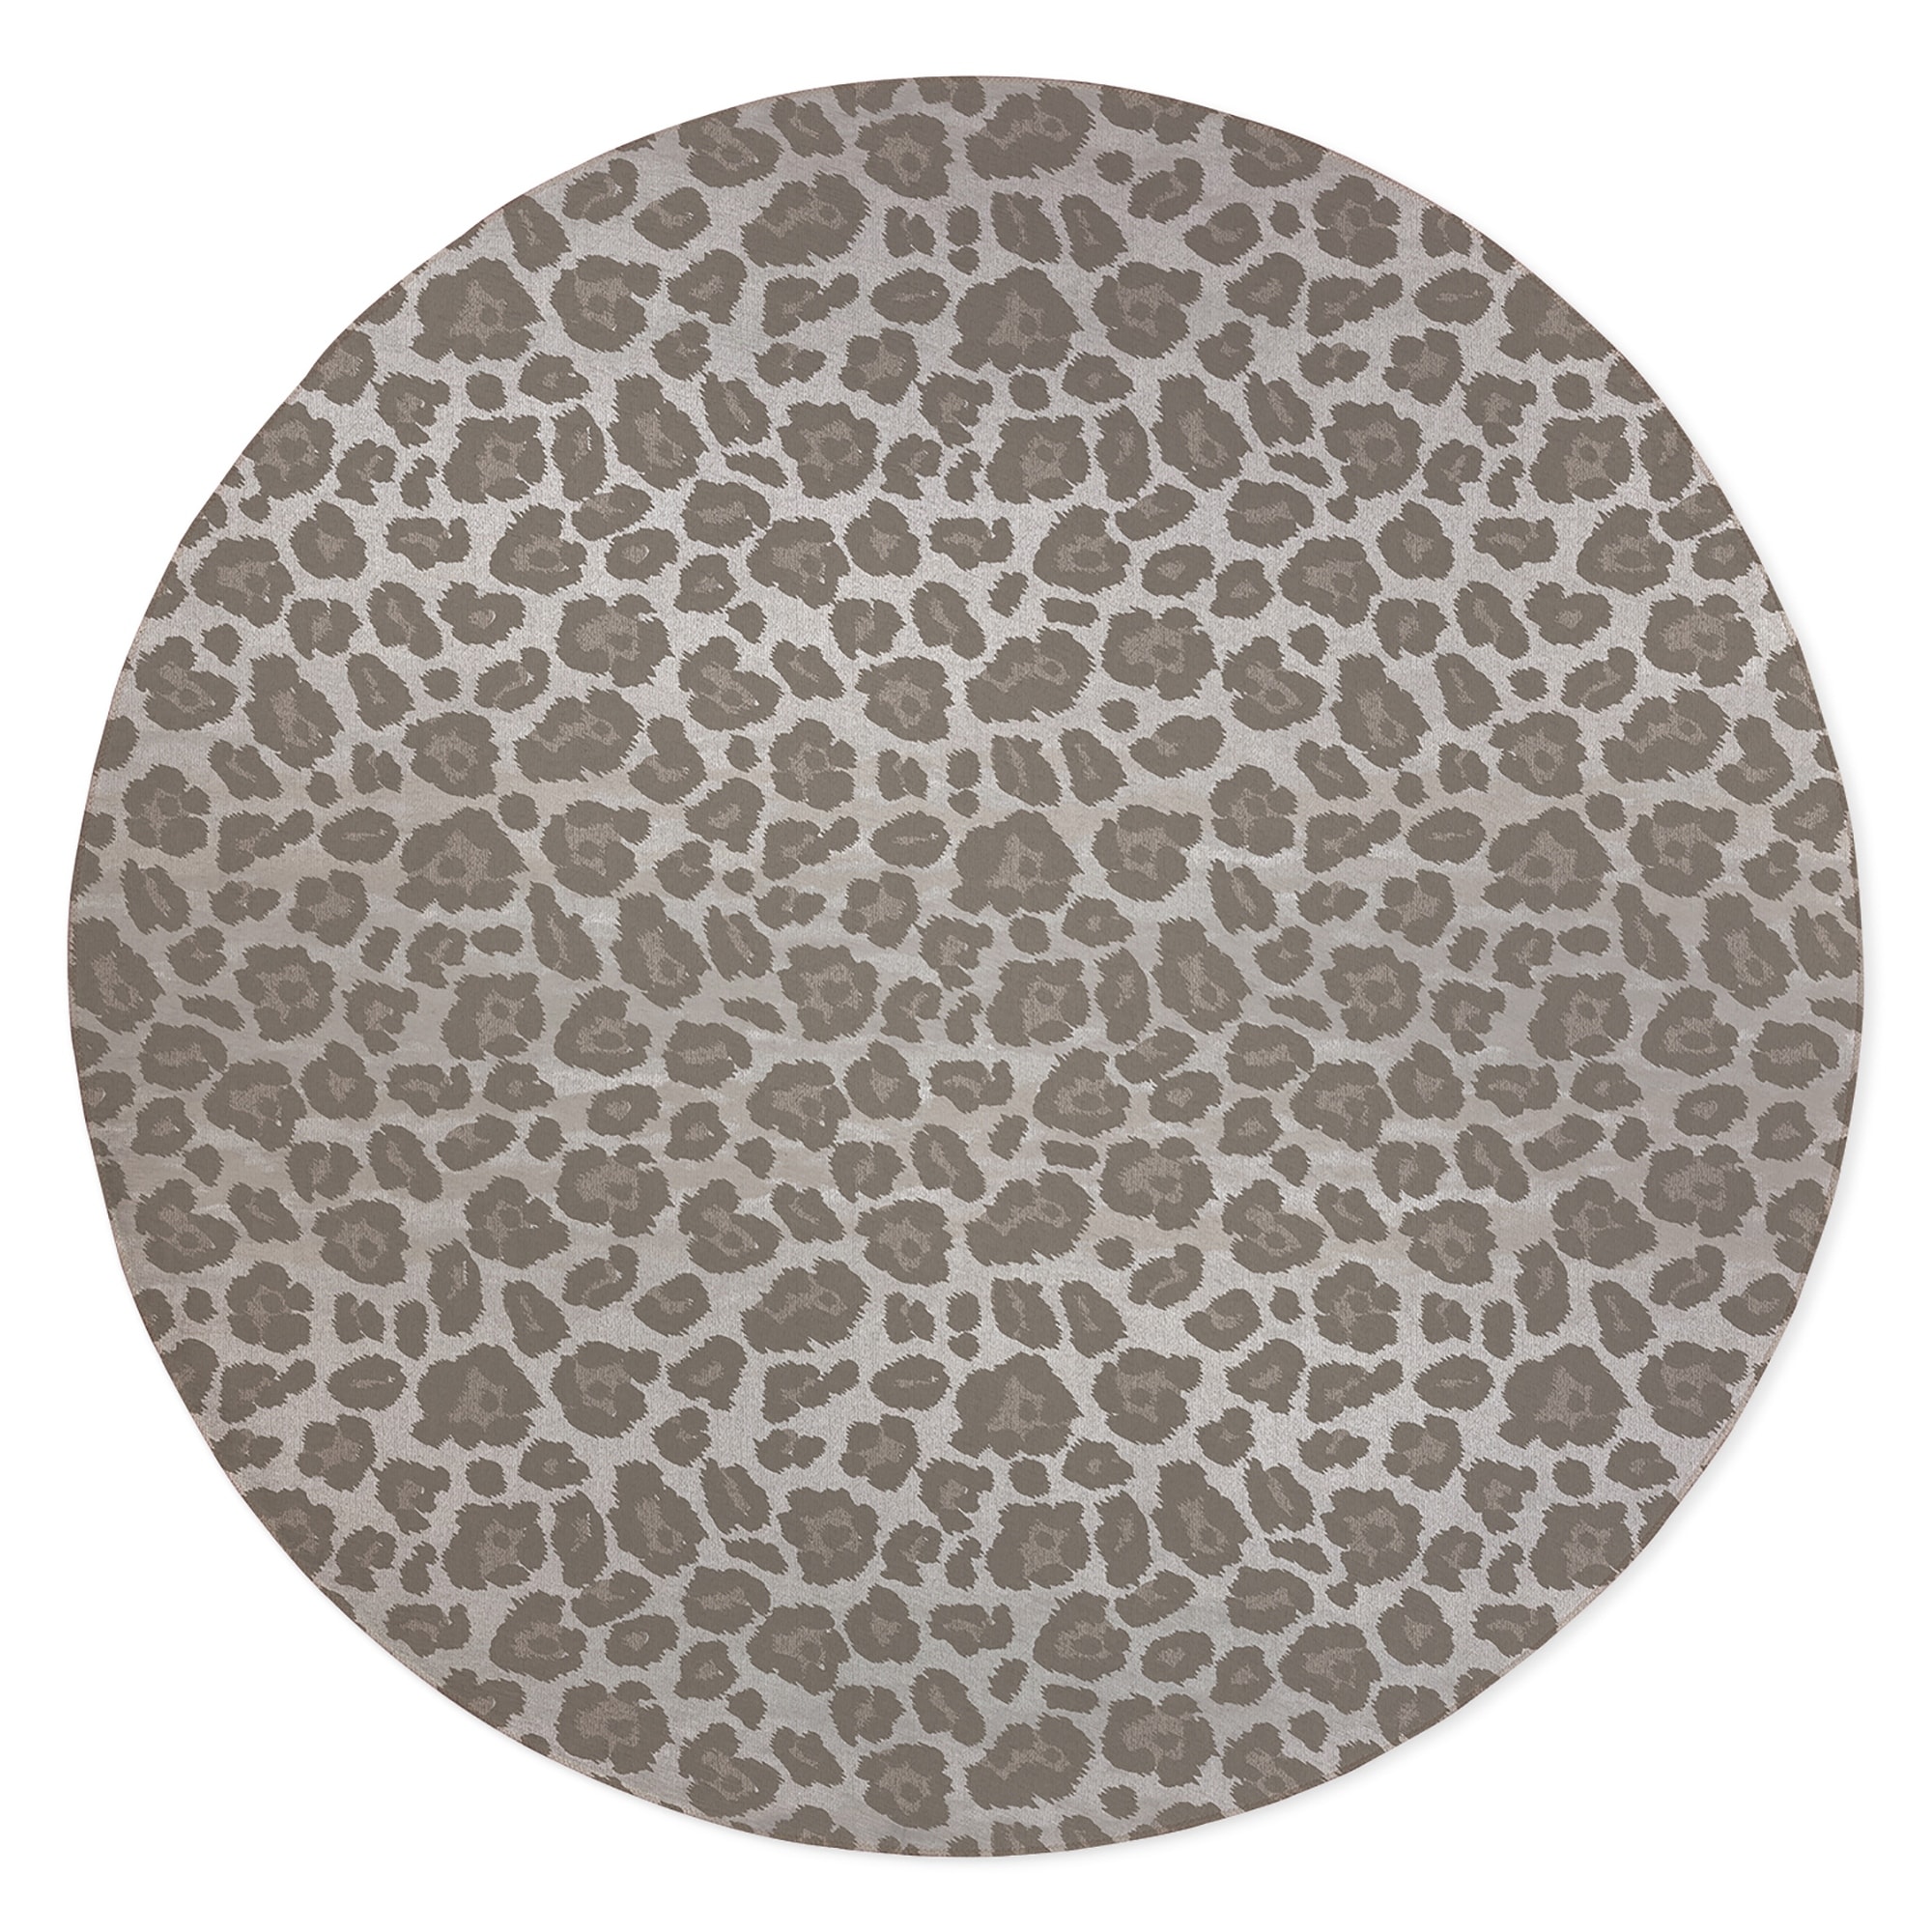 https://ak1.ostkcdn.com/images/products/is/images/direct/6bbe1cedf686e63c523e9ec78333b159078913c1/CHEETAH-TAUPE-Bath-Rug-By-Kavka-Designs.jpg